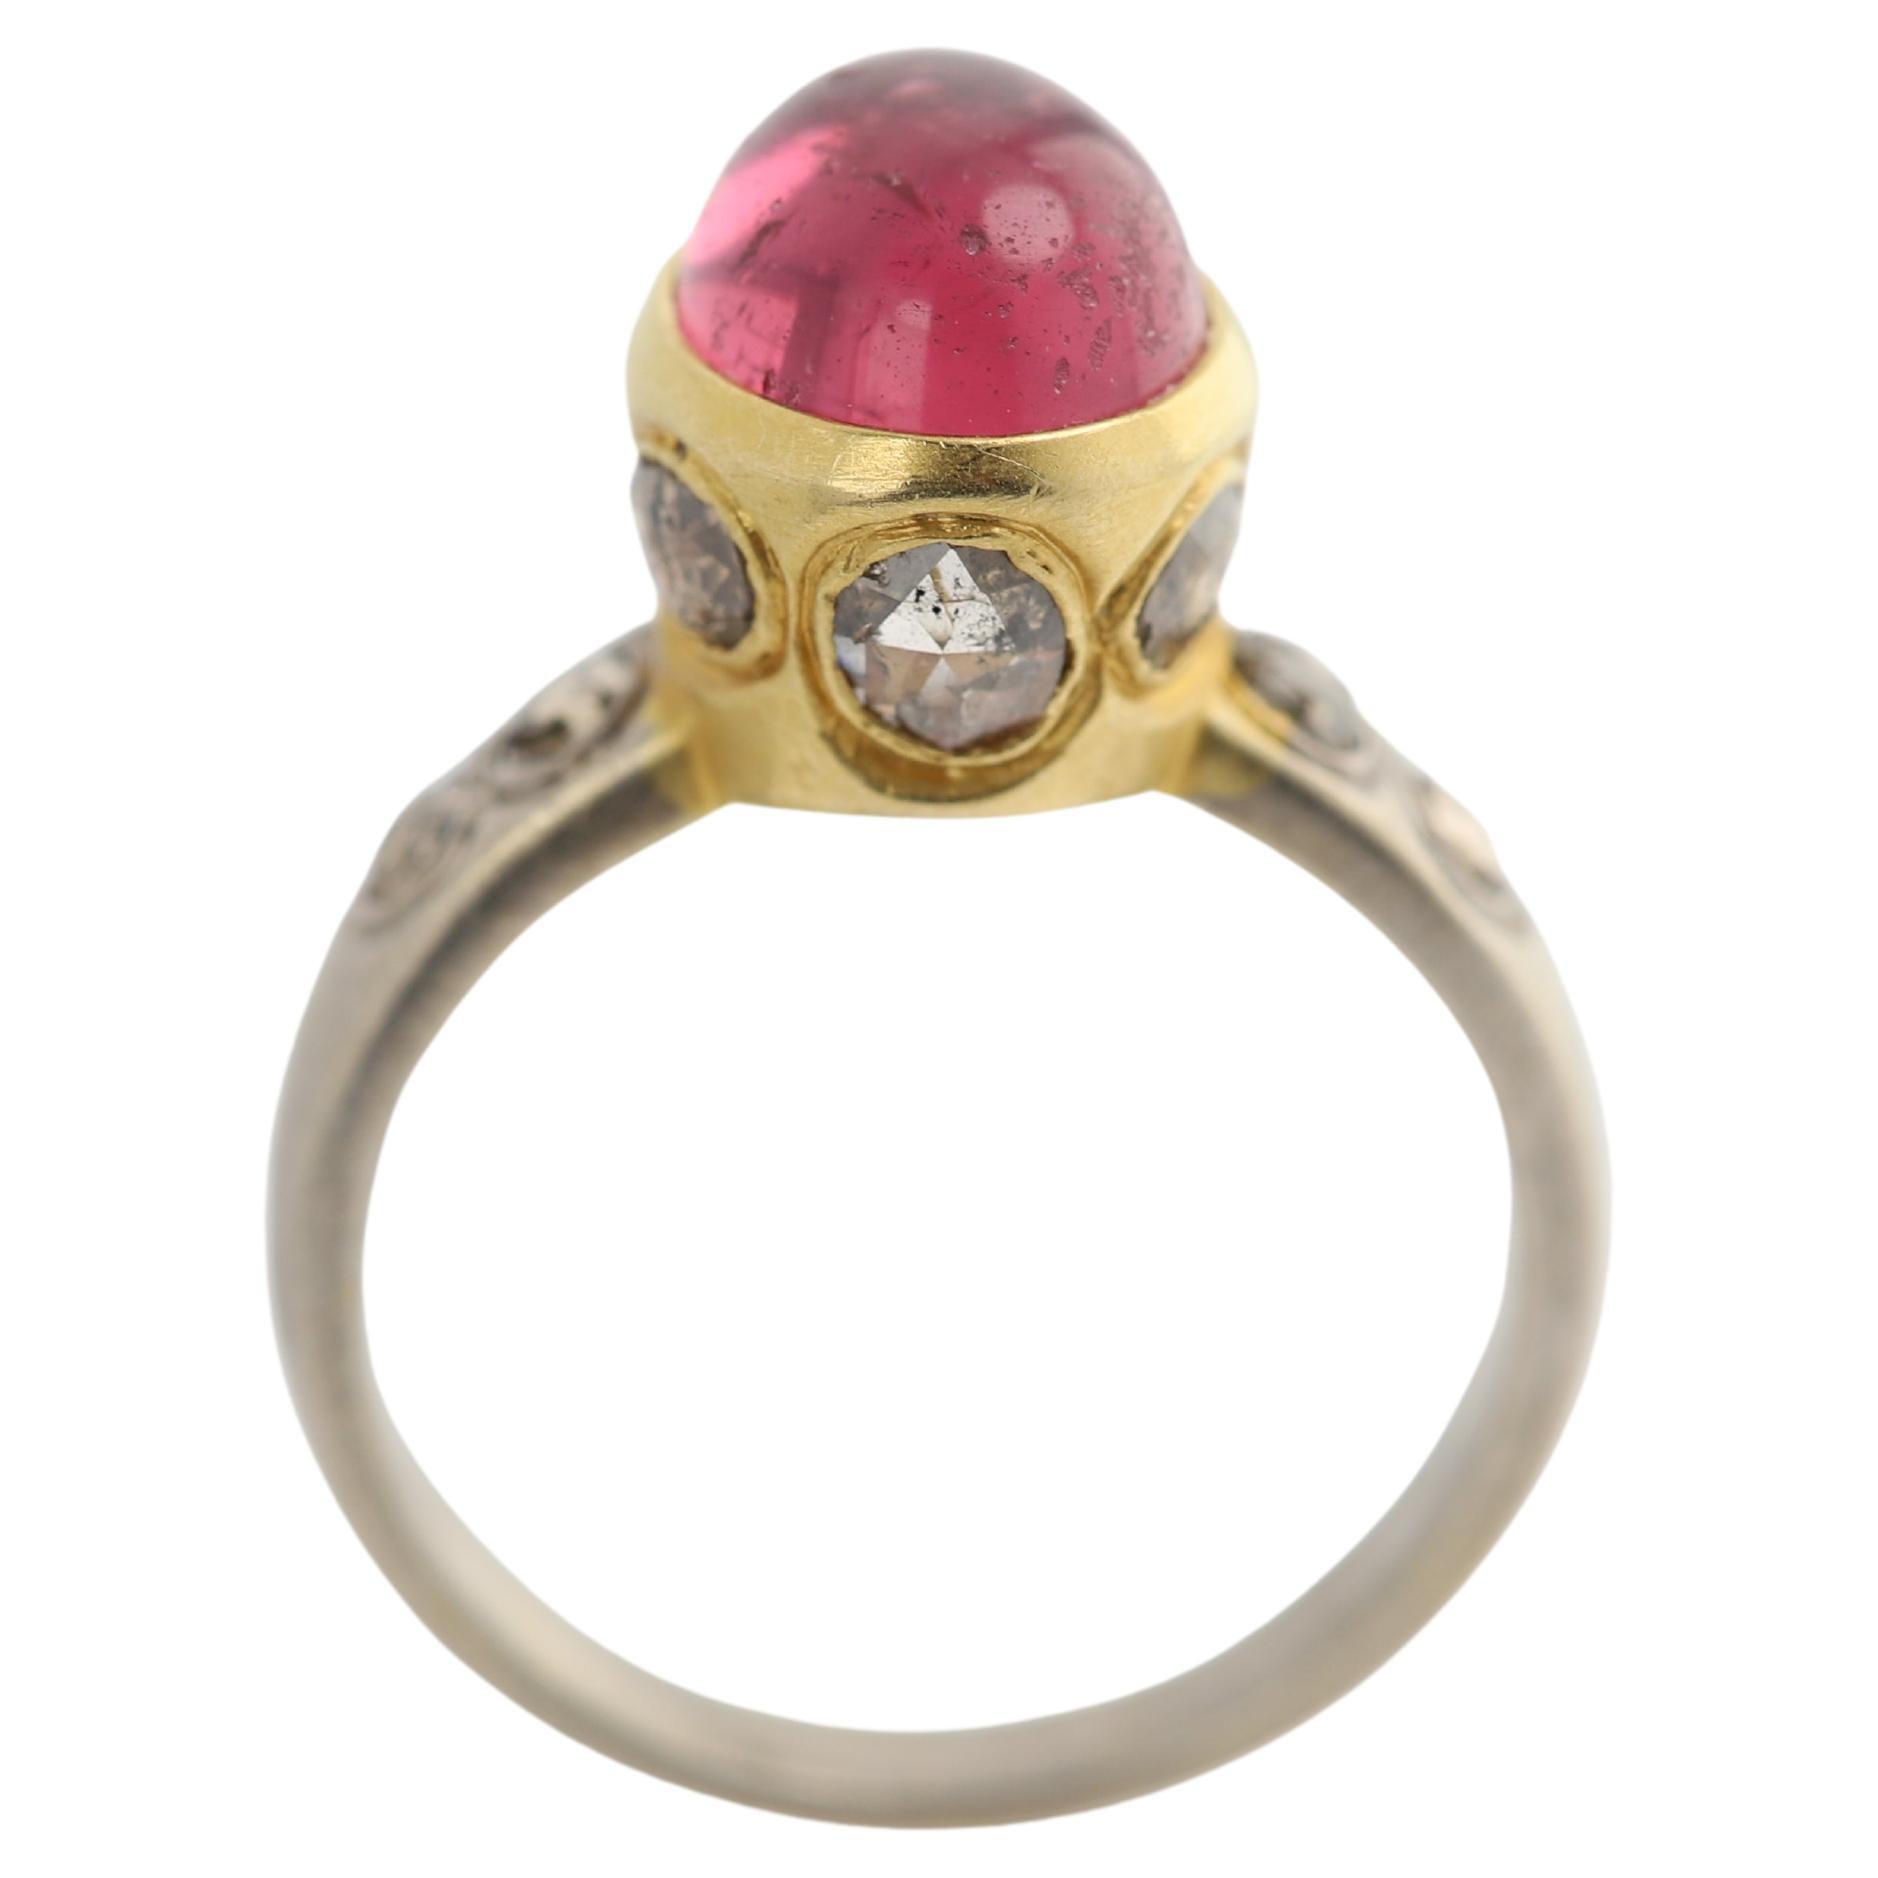 What does pink tourmaline mean?